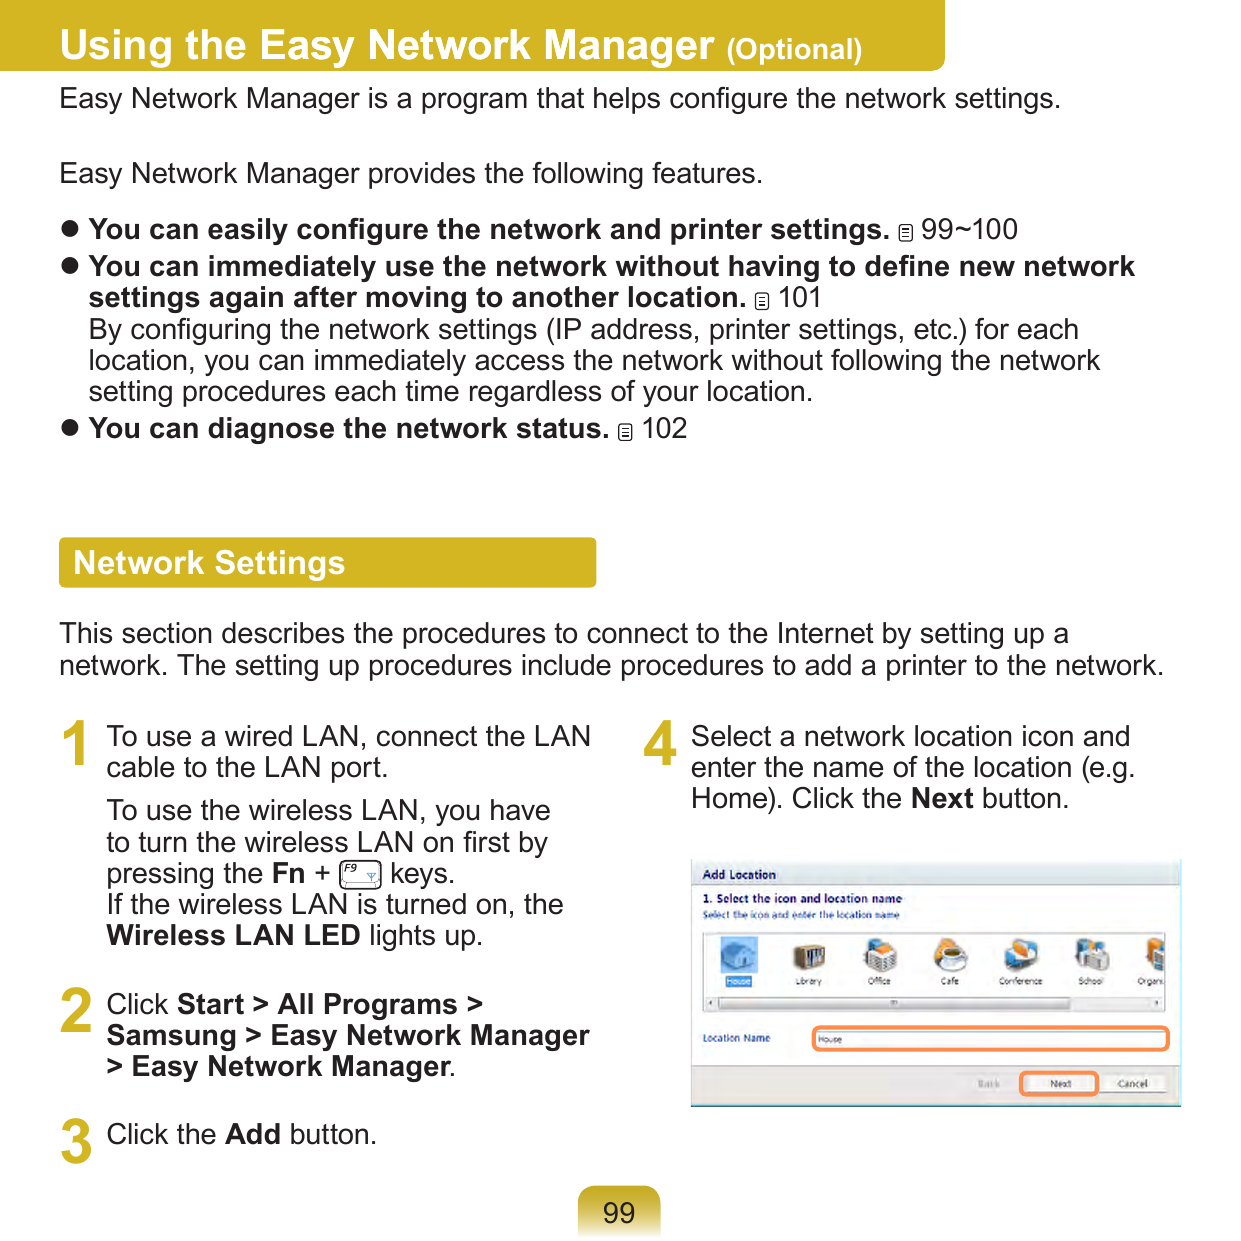 99Using the Easy Network ManagerEasy Network Manager (Optional)Easy Network Manager is a program that helps congure the network settings.Easy Network Manager provides the following features. You can easily congure the network and printer settings.   99~100 You can immediately use the network without having to dene new network settings again after moving to another location.   101 By conguring the network settings (IP address, printer settings, etc.) for each location, you can immediately access the network without following the network setting procedures each time regardless of your location.  You can diagnose the network status.   102Network SettingsThis section describes the procedures to connect to the Internet by setting up a network. The setting up procedures include procedures to add a printer to the network.1  To use a wired LAN, connect the LAN cable to the LAN port.To use the wireless LAN, you have to turn the wireless LAN on rst by pressing the Fn +   keys.  If the wireless LAN is turned on, the Wireless LAN LED lights up.2  Click Start &gt; All Programs &gt; Samsung &gt; Easy Network Manager &gt; Easy Network Manager.3  Click the Add button.4  Select a network location icon and enter the name of the location (e.g. Home). Click the Next button.